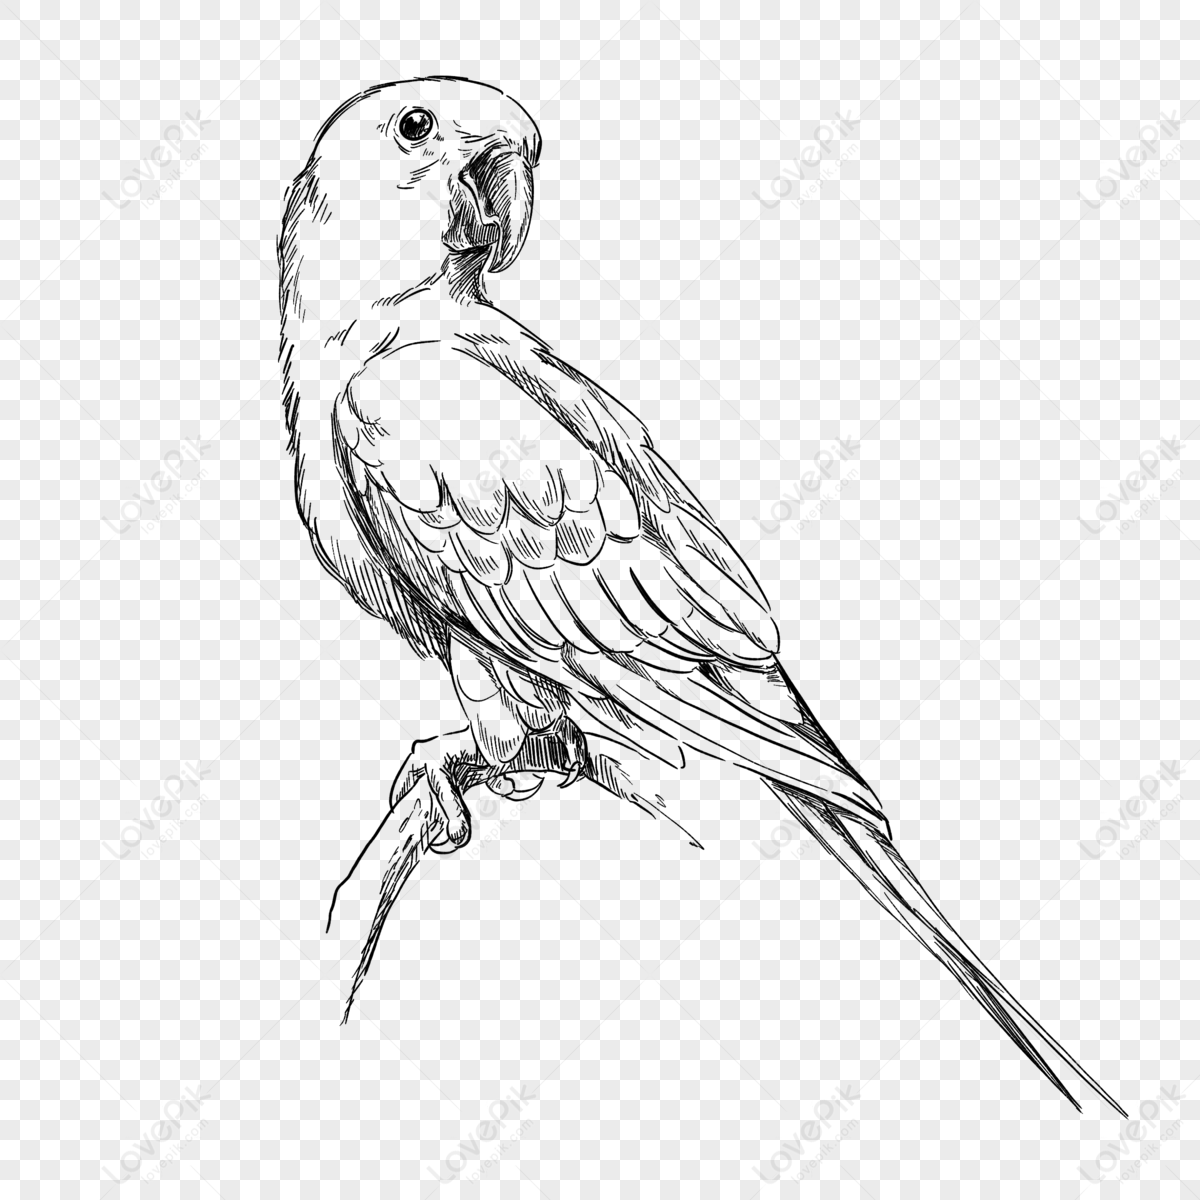 How To Draw A Parrot For Kids, Step by Step, Drawing Guide, by Dawn -  DragoArt